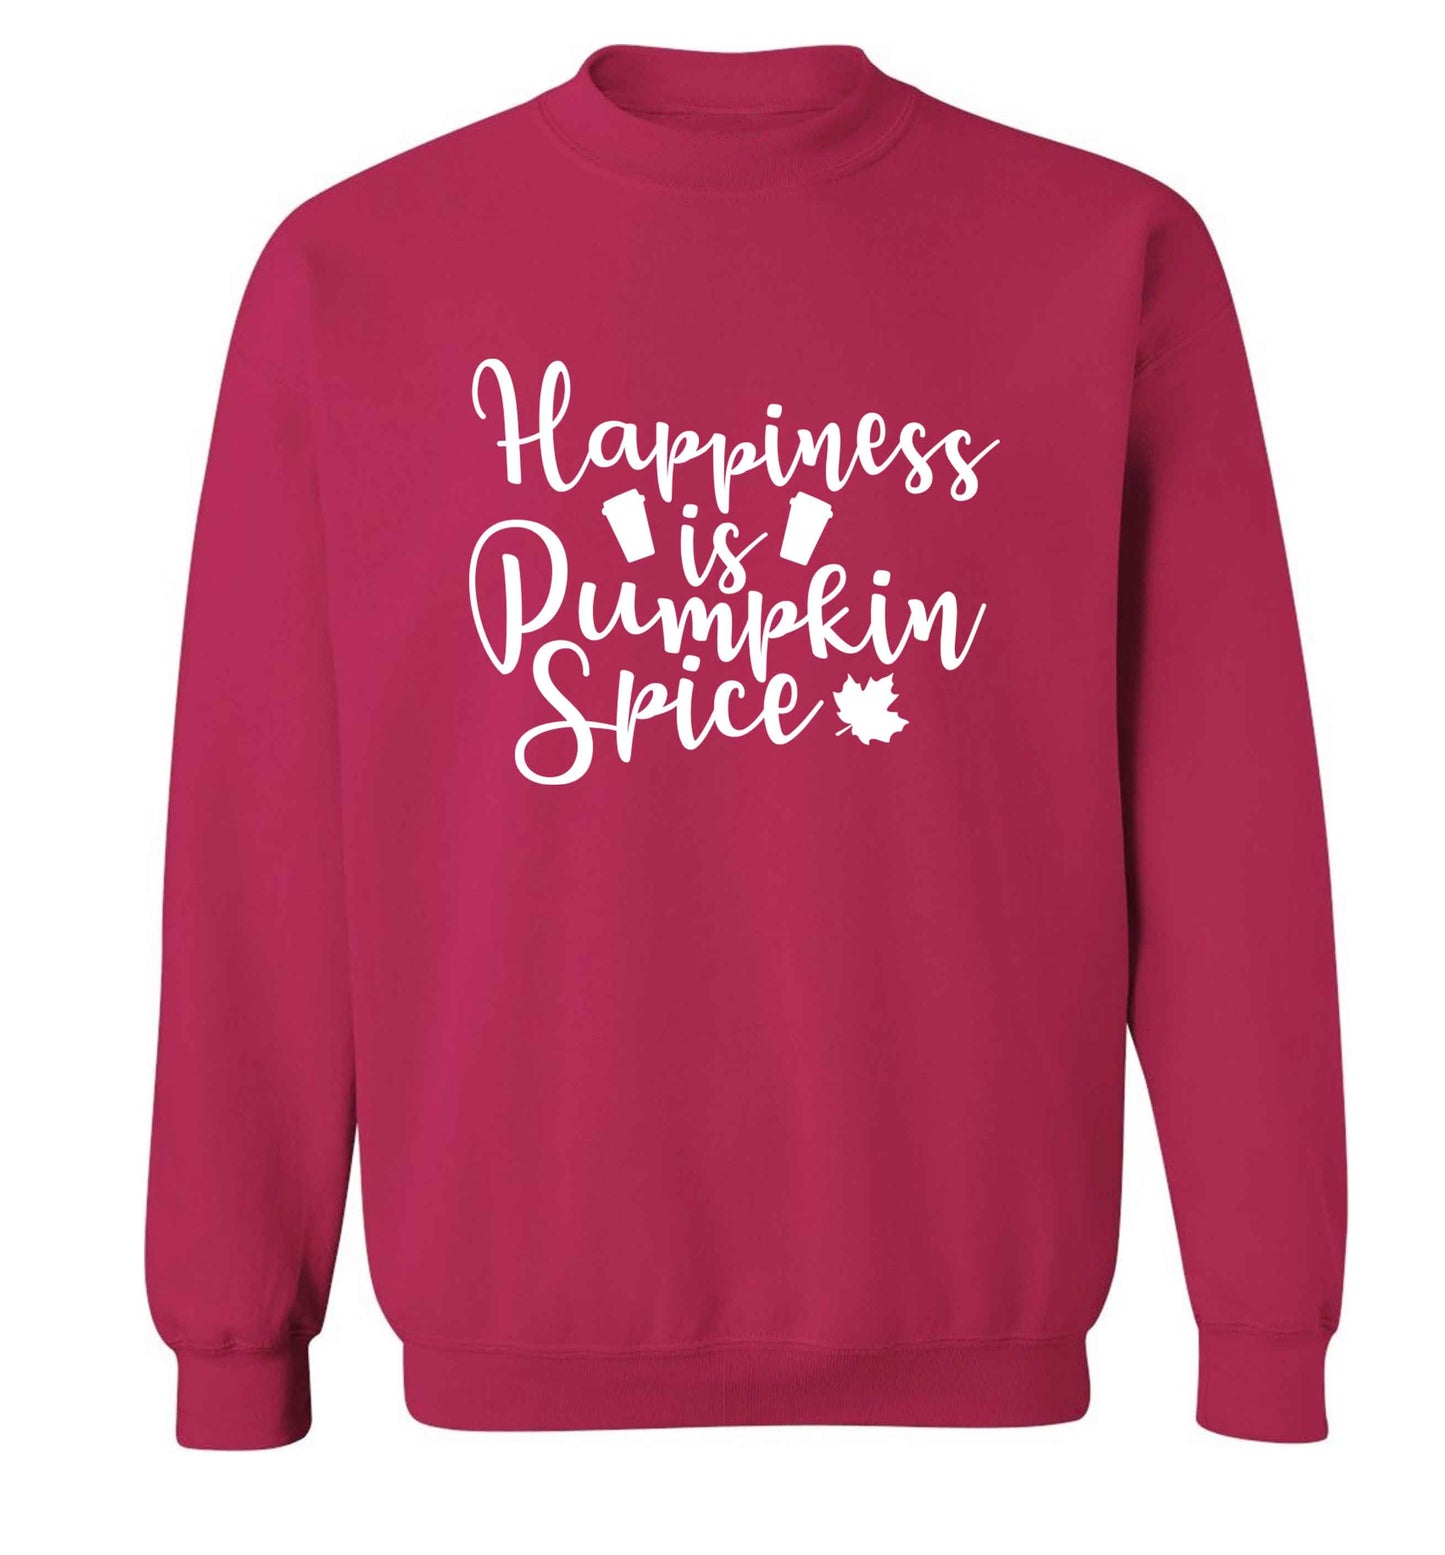 Happiness Pumpkin Spice adult's unisex pink sweater 2XL